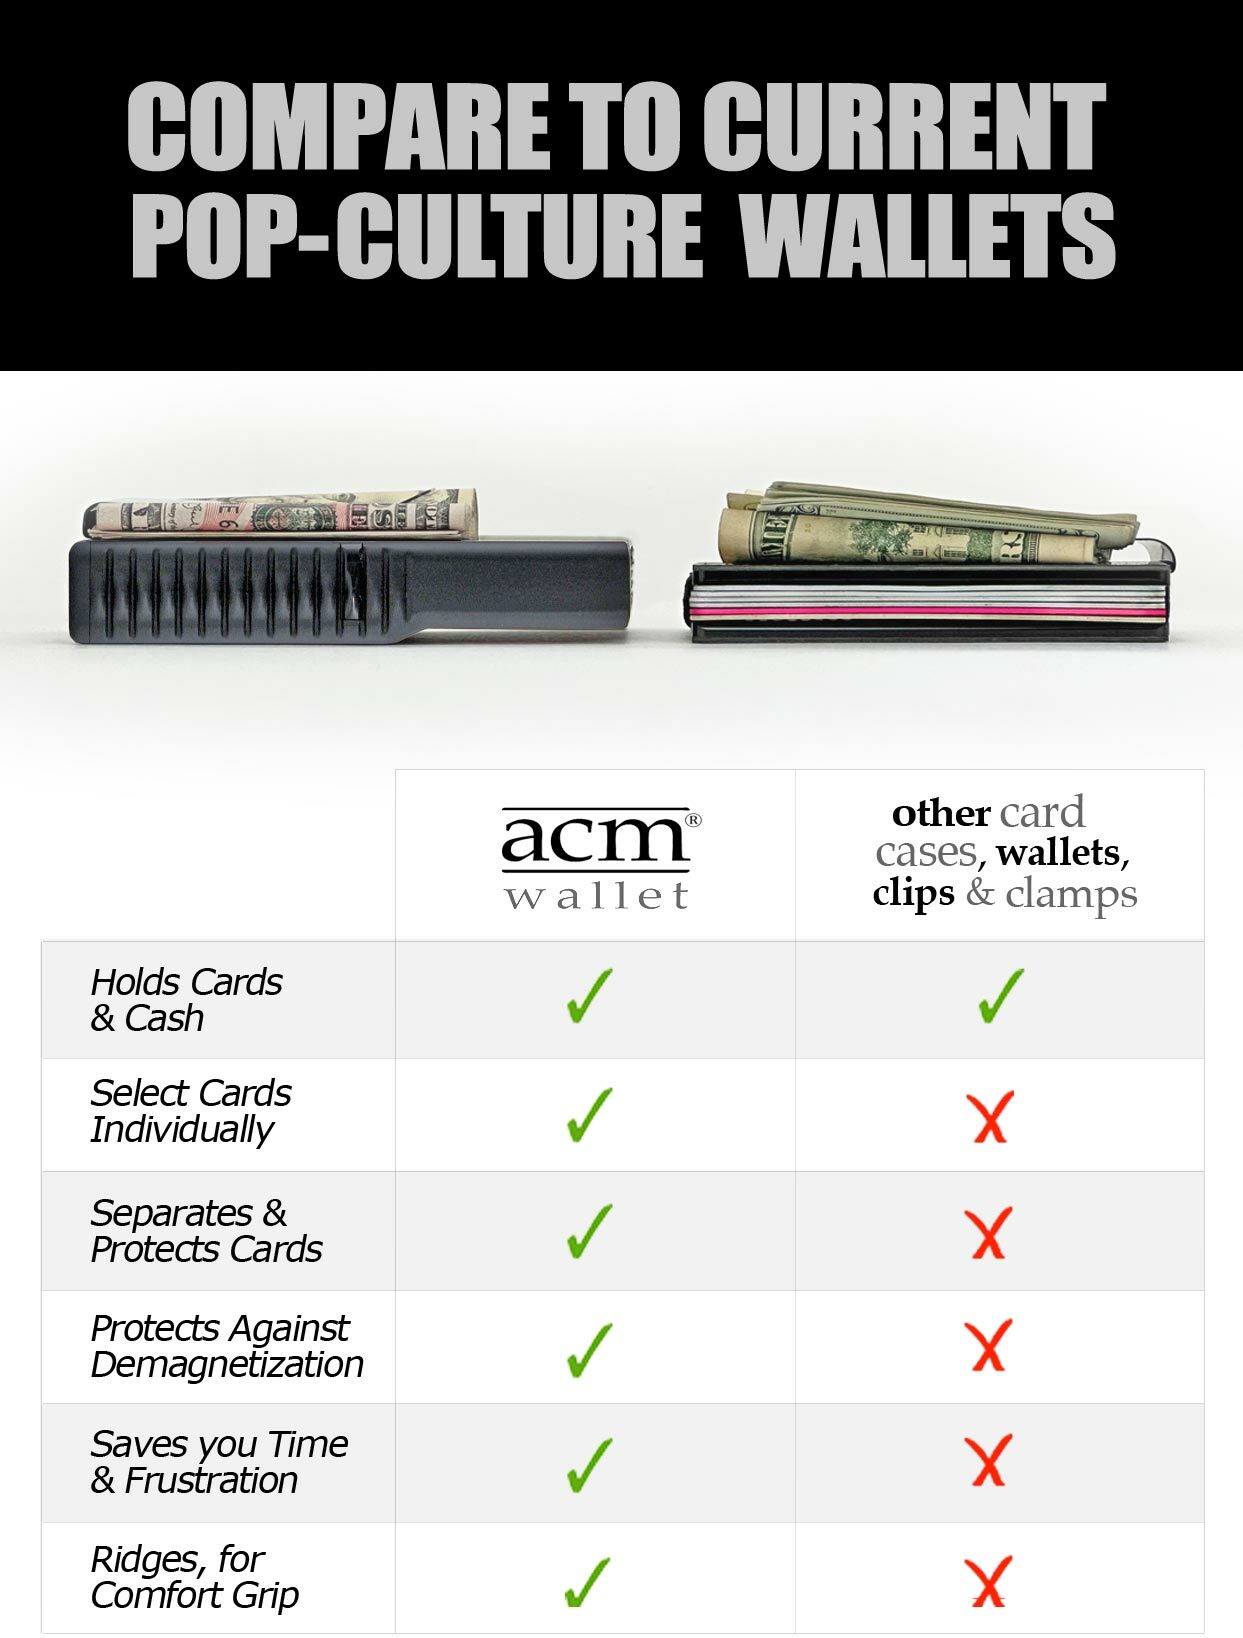 Black Satin ACM Wallet compared to Smasher wallet